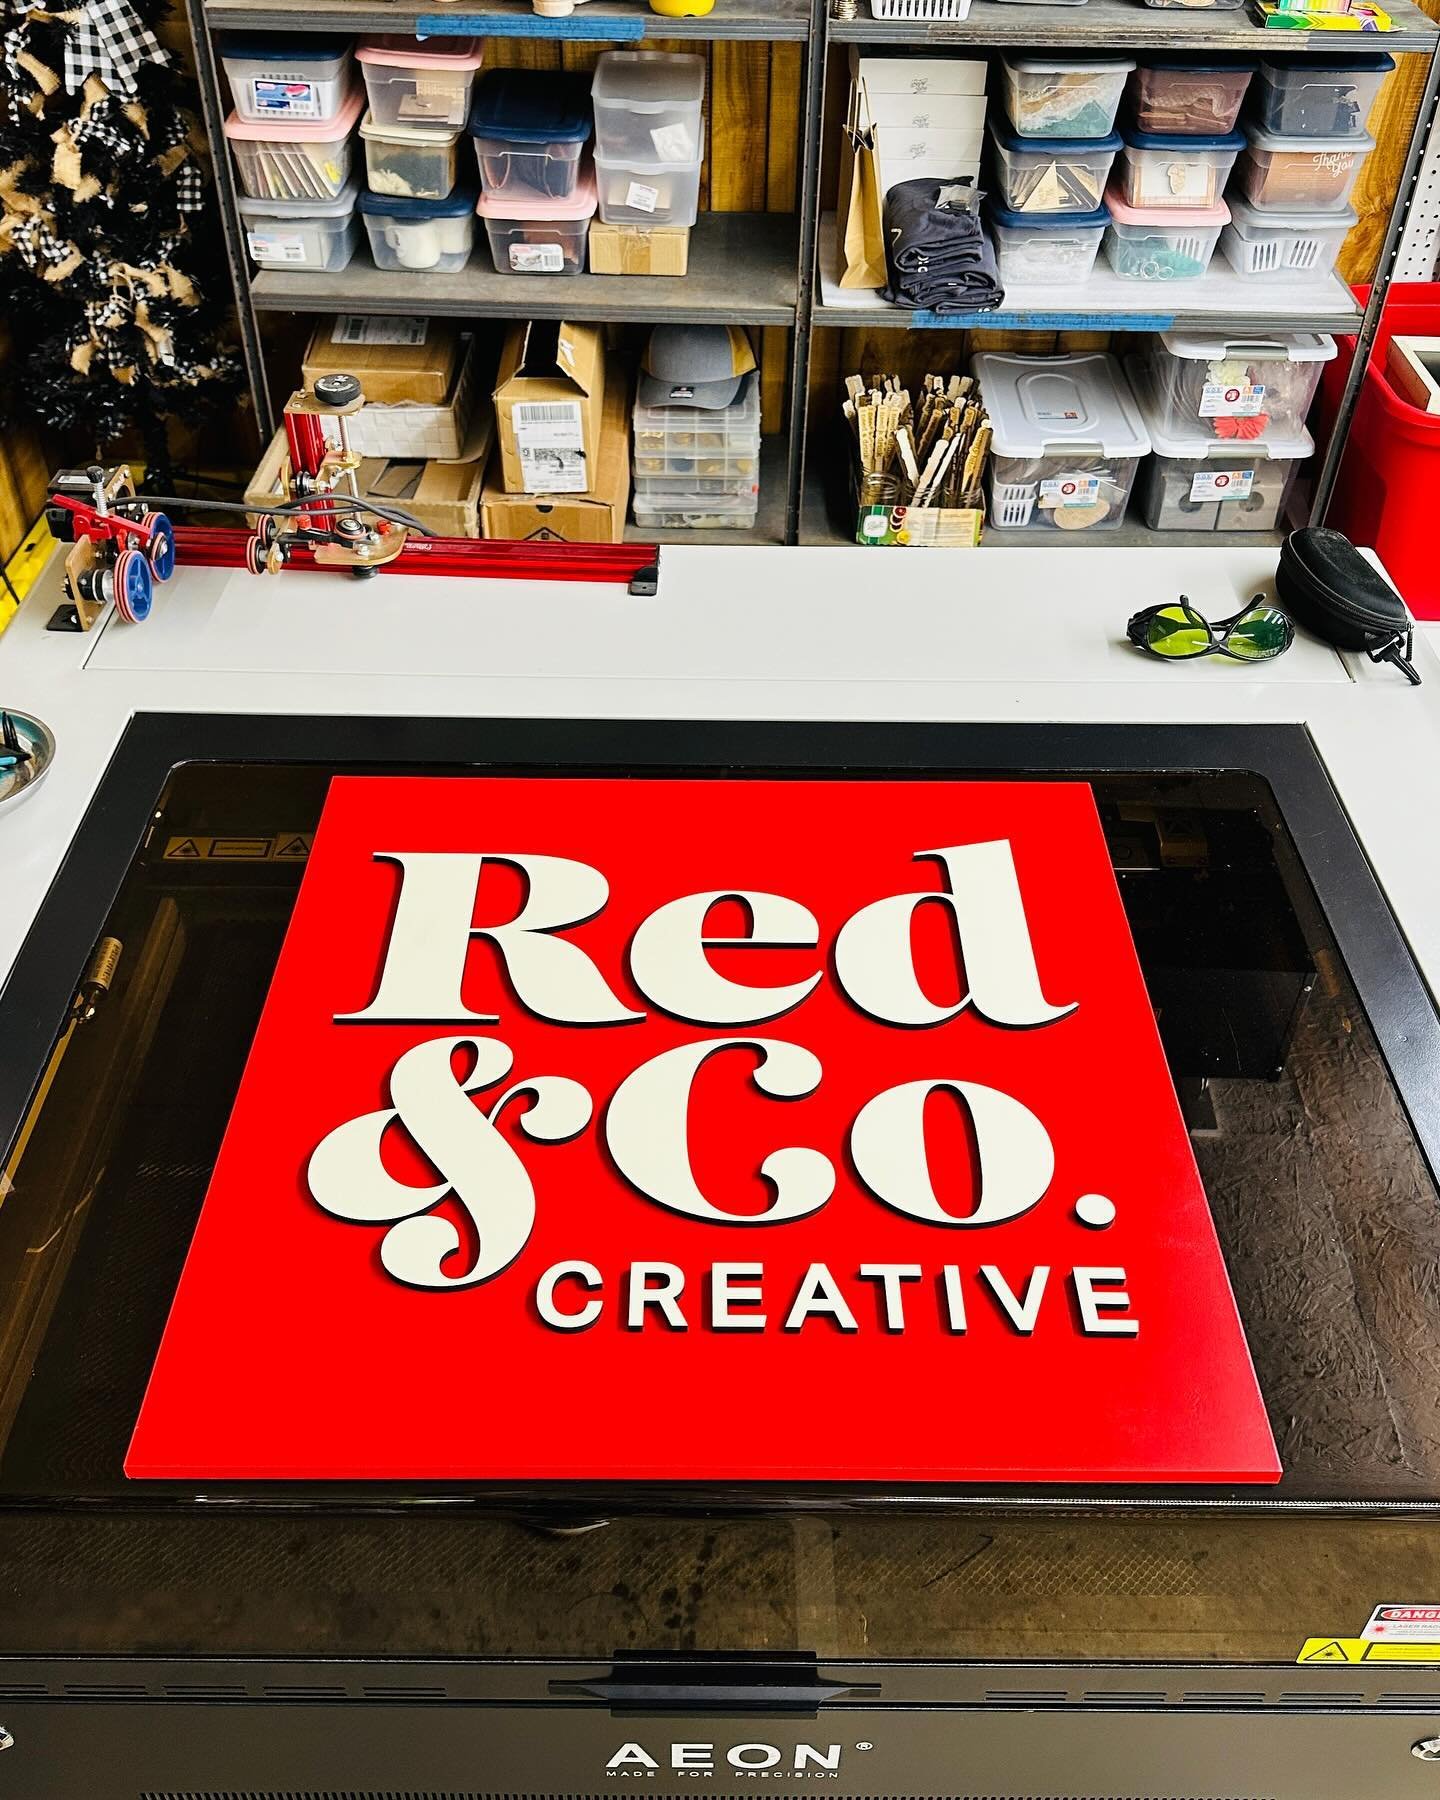 🌟✨ Introducing the latest addition to our boss babe arsenal: a custom-made business sign for our girl boss extraordinaire, who crafts hella cool greeting cards! 💼💌

🌟✨Be sure to checkout @red_co_creative&hellip;.you will definitely love what this